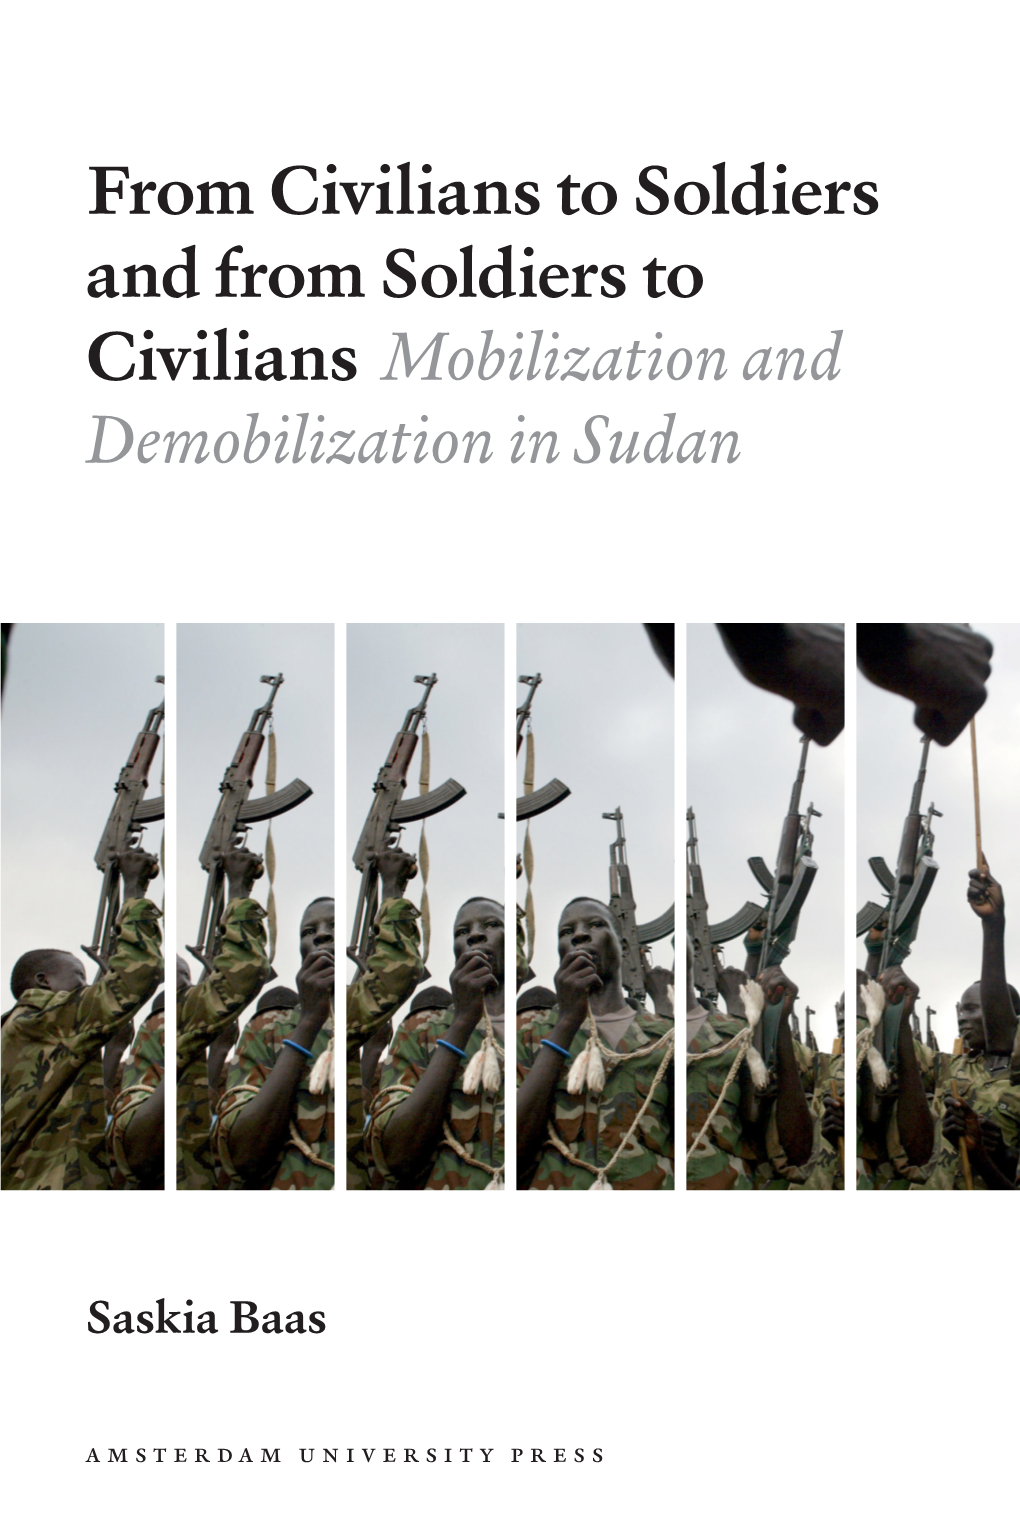 From Civilians to Soldiers and from Soldiers to Civilians Mobilization and Demobilization in Sudan